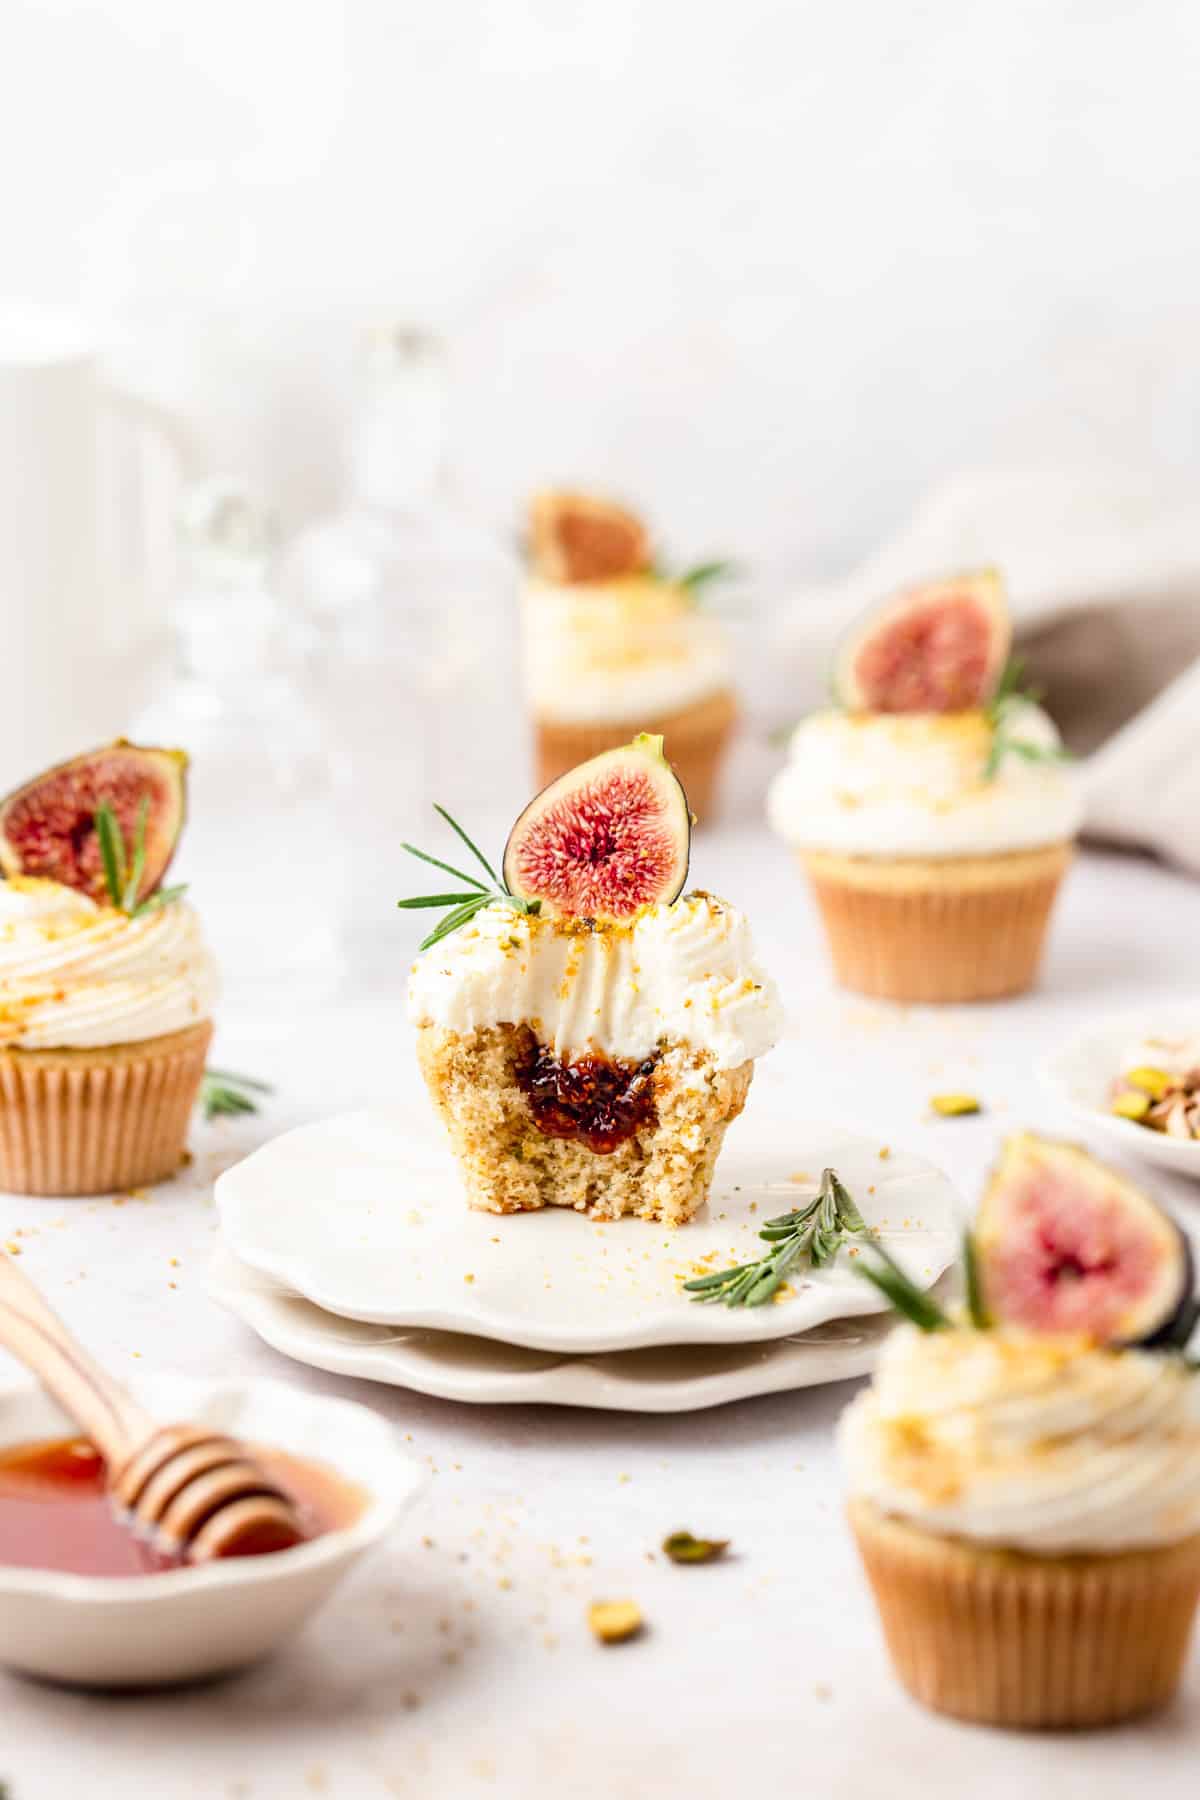 fig olive oil cupcakes with pistachios and rosemary filled with fig jam.